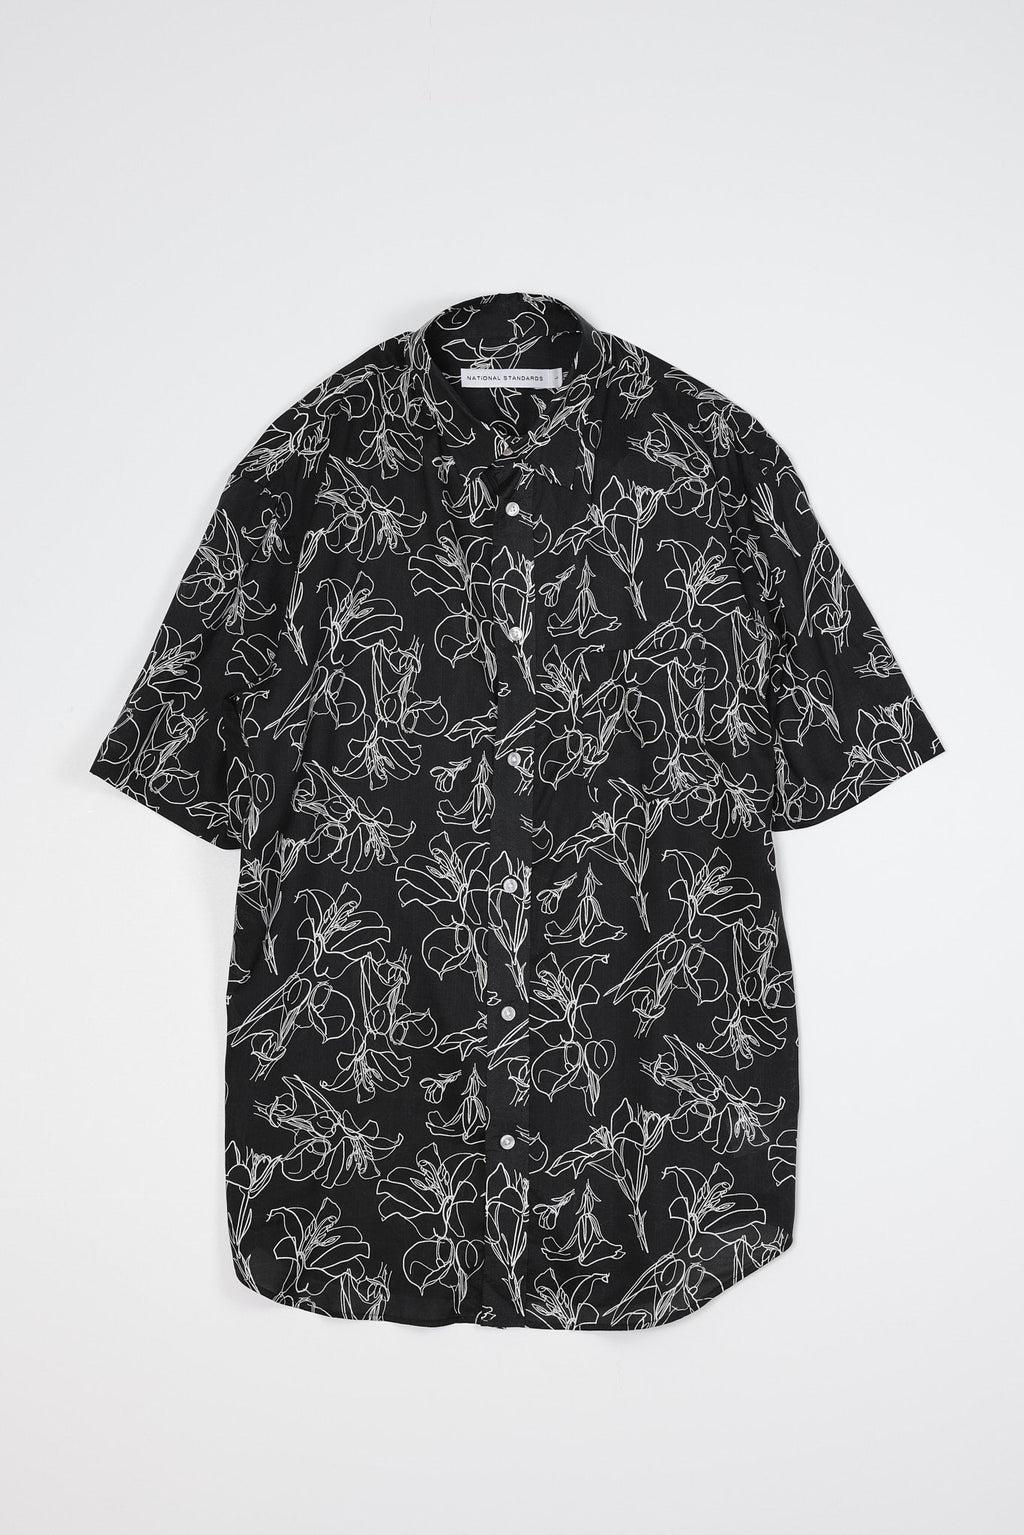 Japanese Hand Drawn Floral Print in Black 01